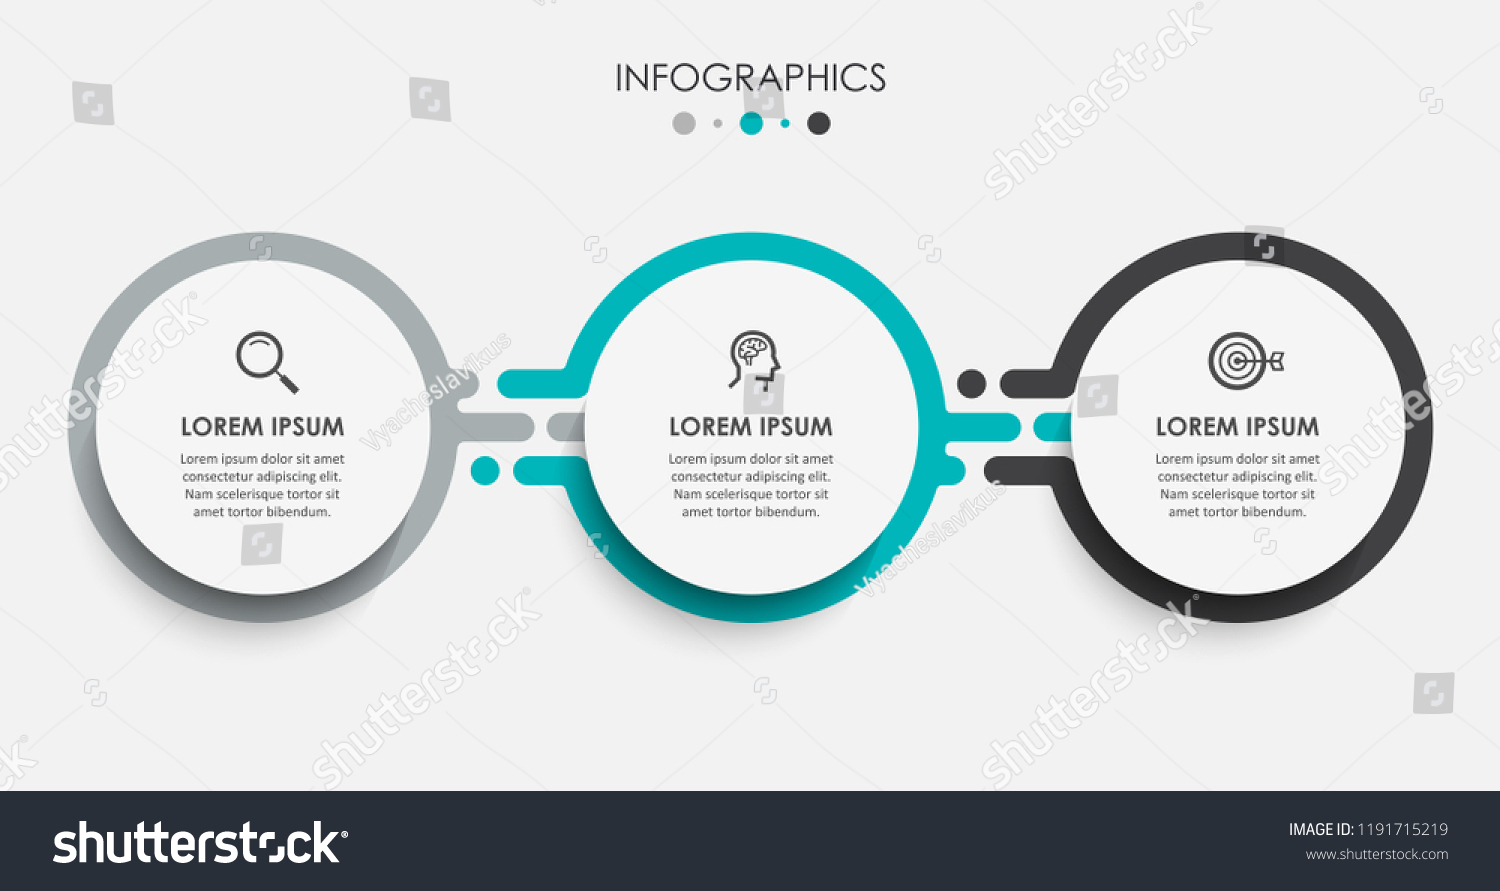 Vector Infographic label design template with icons and 3 options or steps.  Can be used for process diagram, presentations, workflow layout, banner, flow chart, info graph. #1191715219